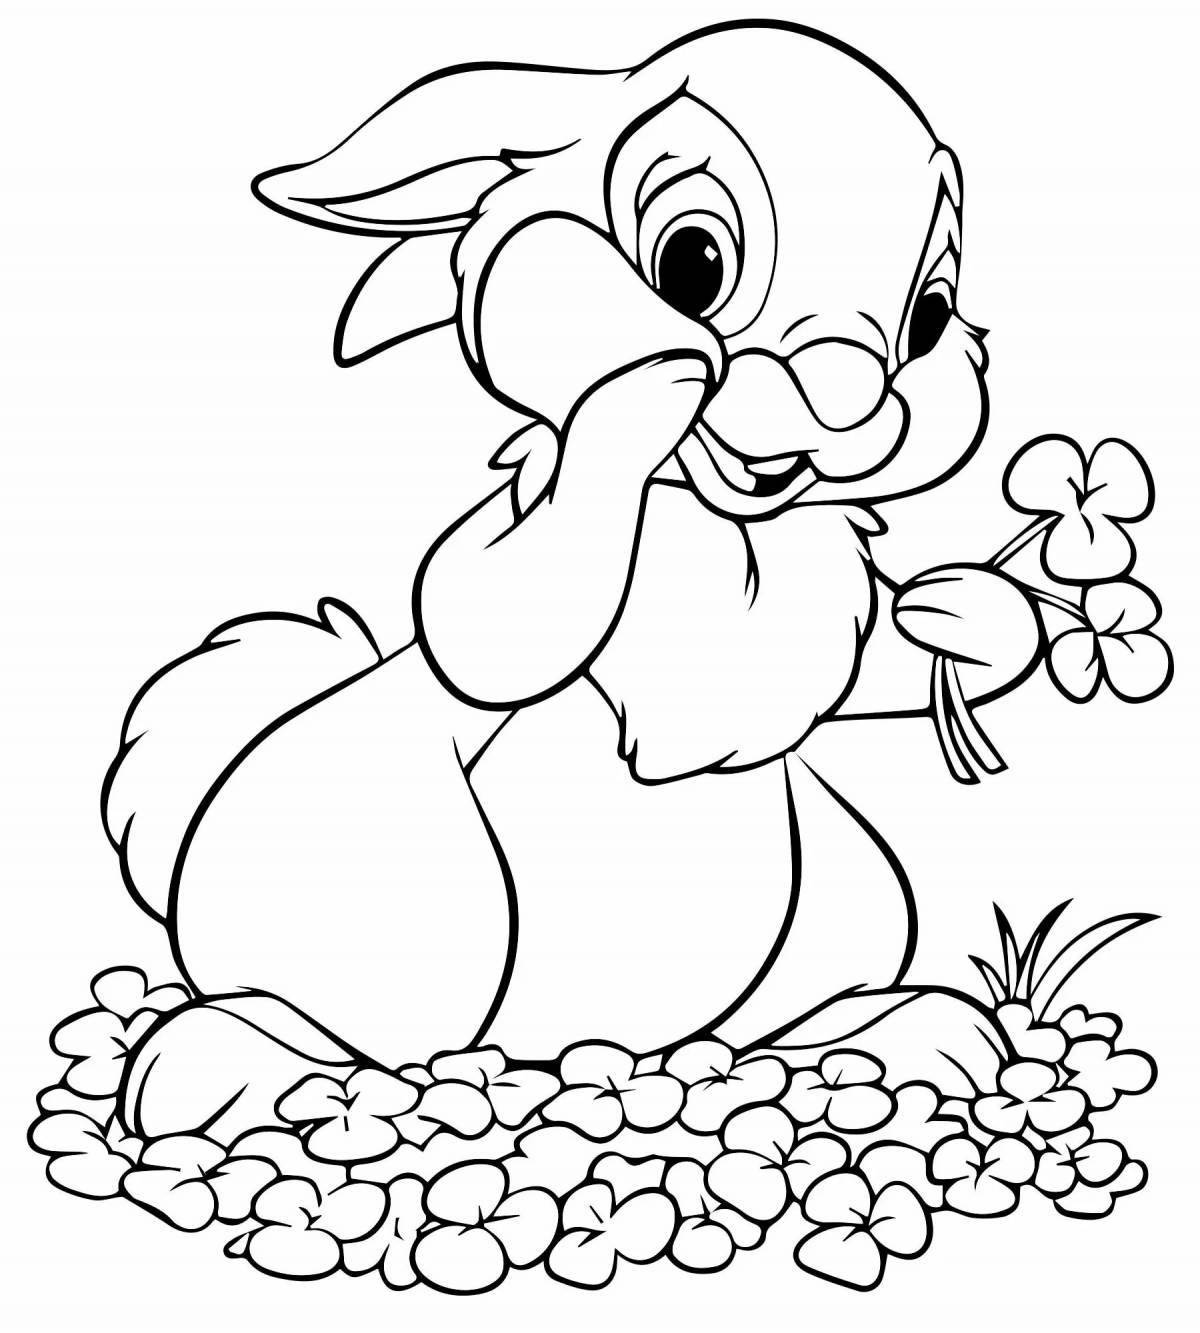 Amazing bunny coloring book for kids